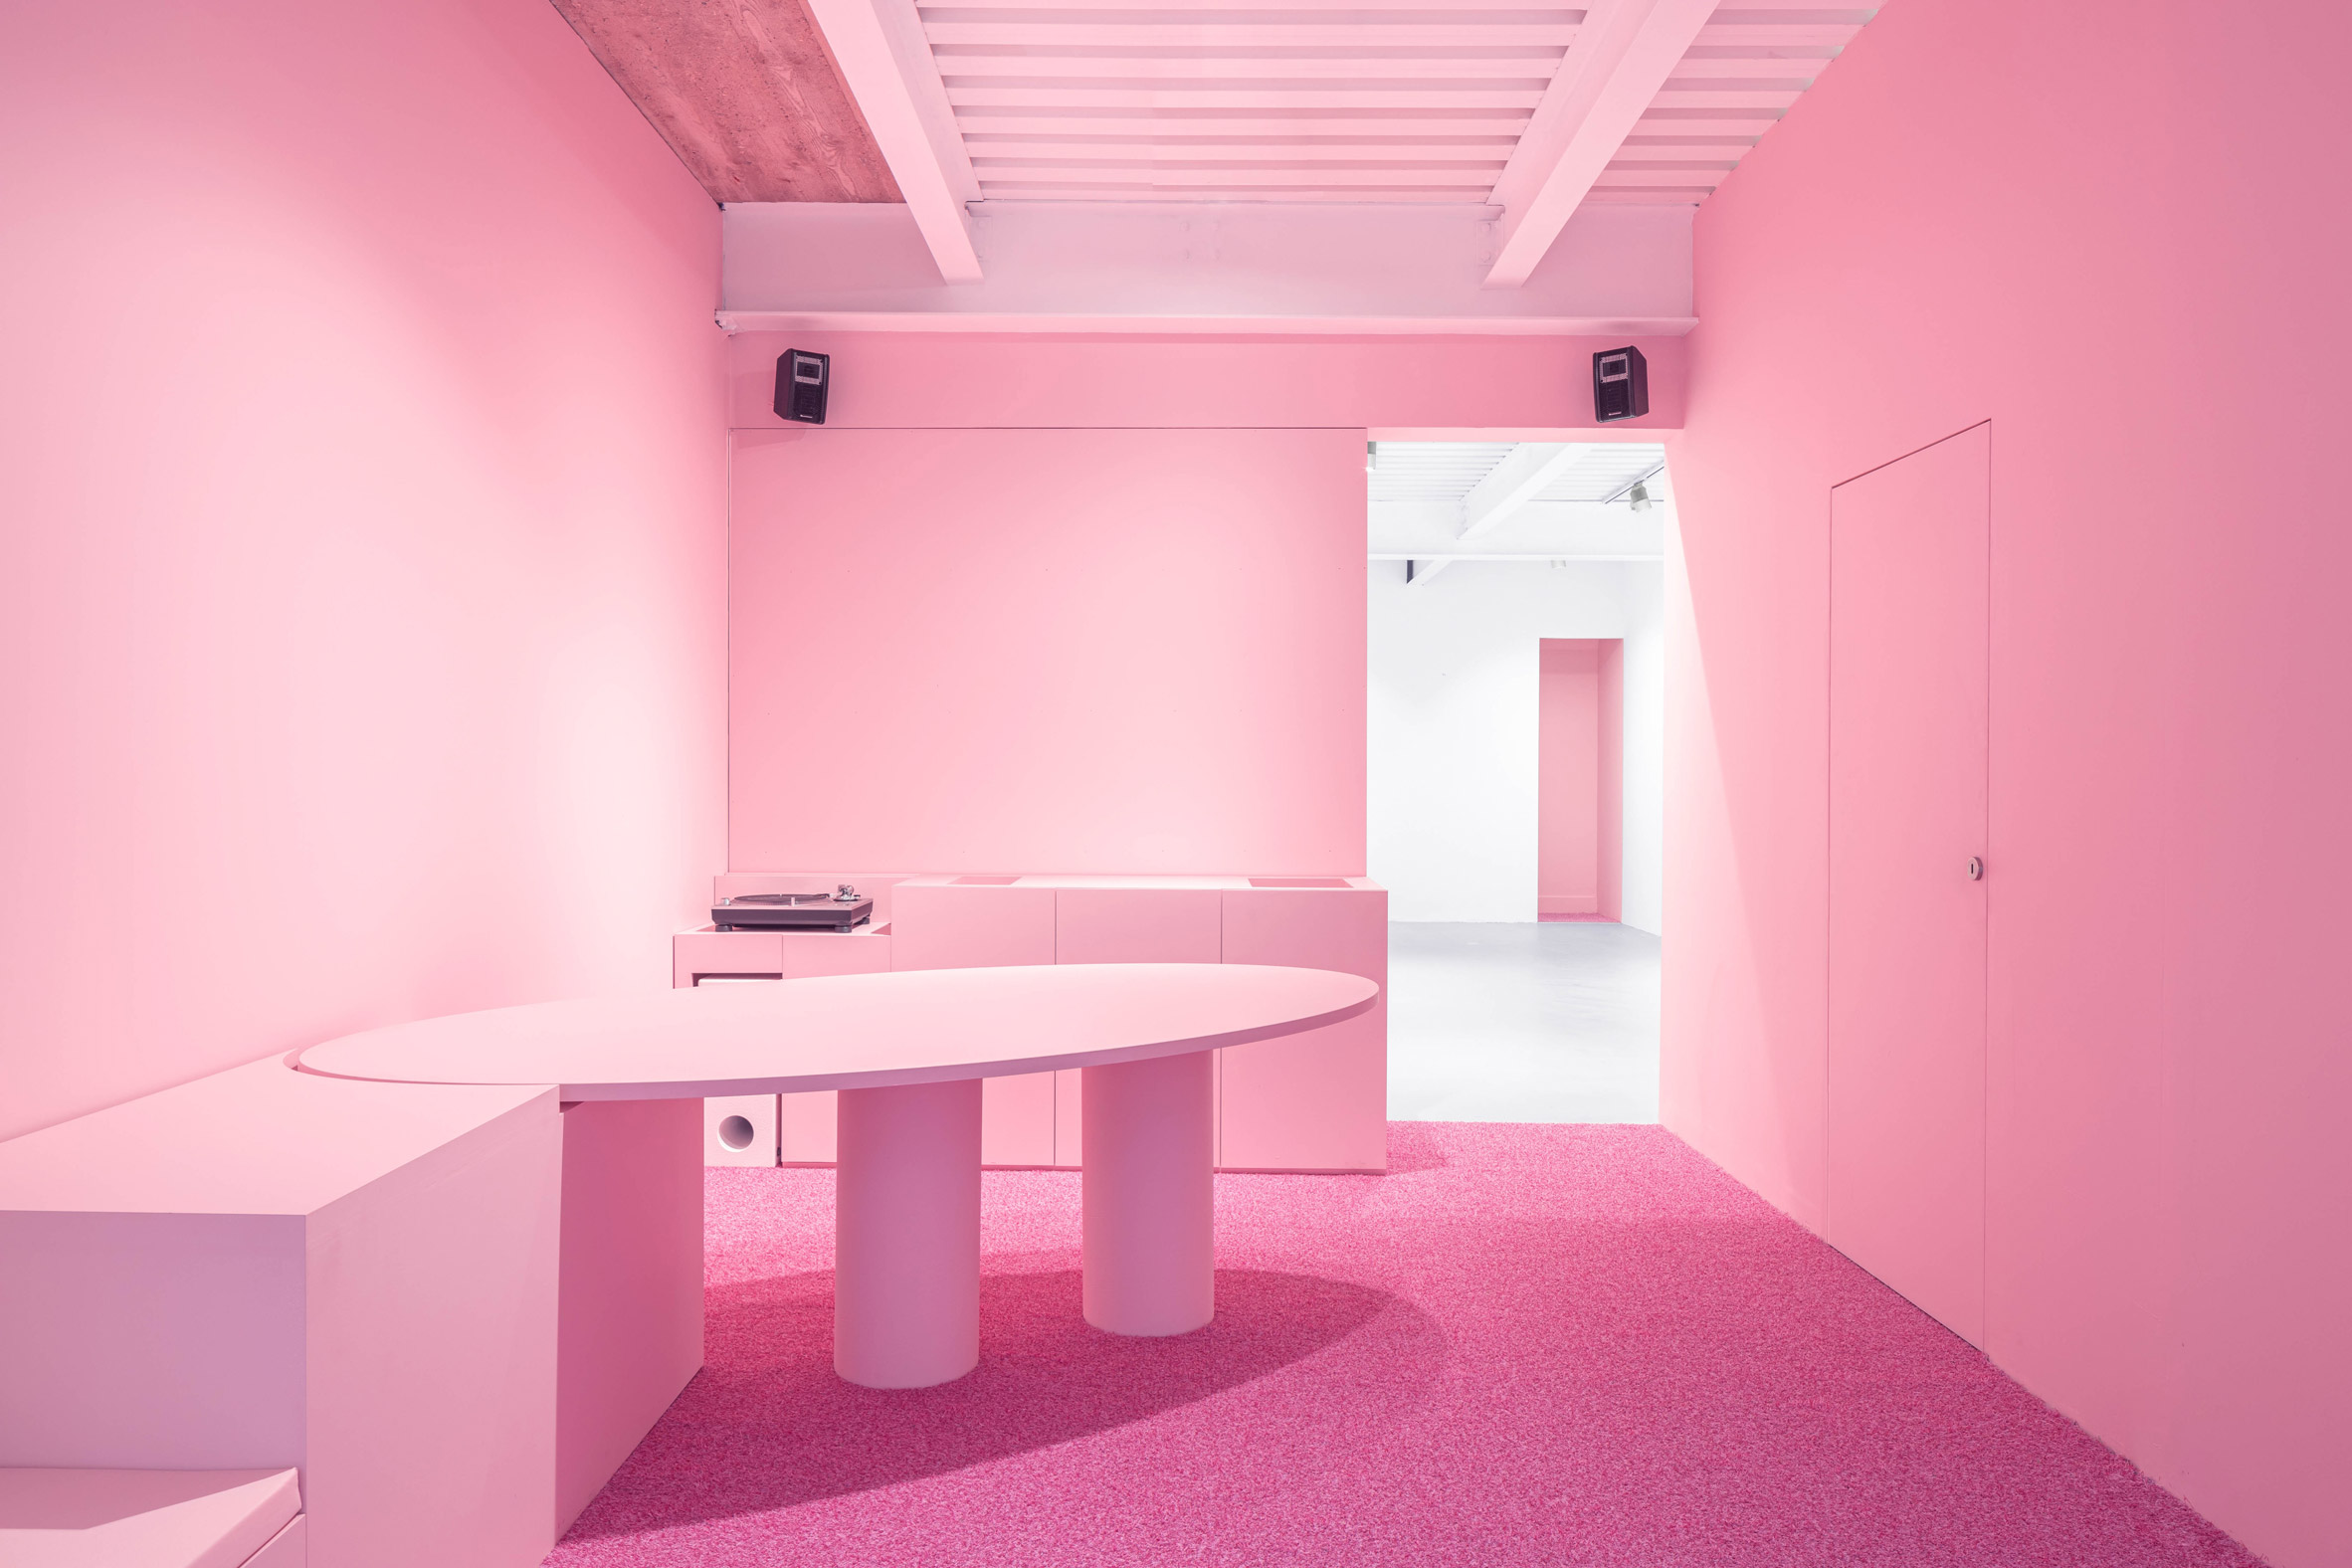 Superzoom gallery in Paris with all-pink interiors